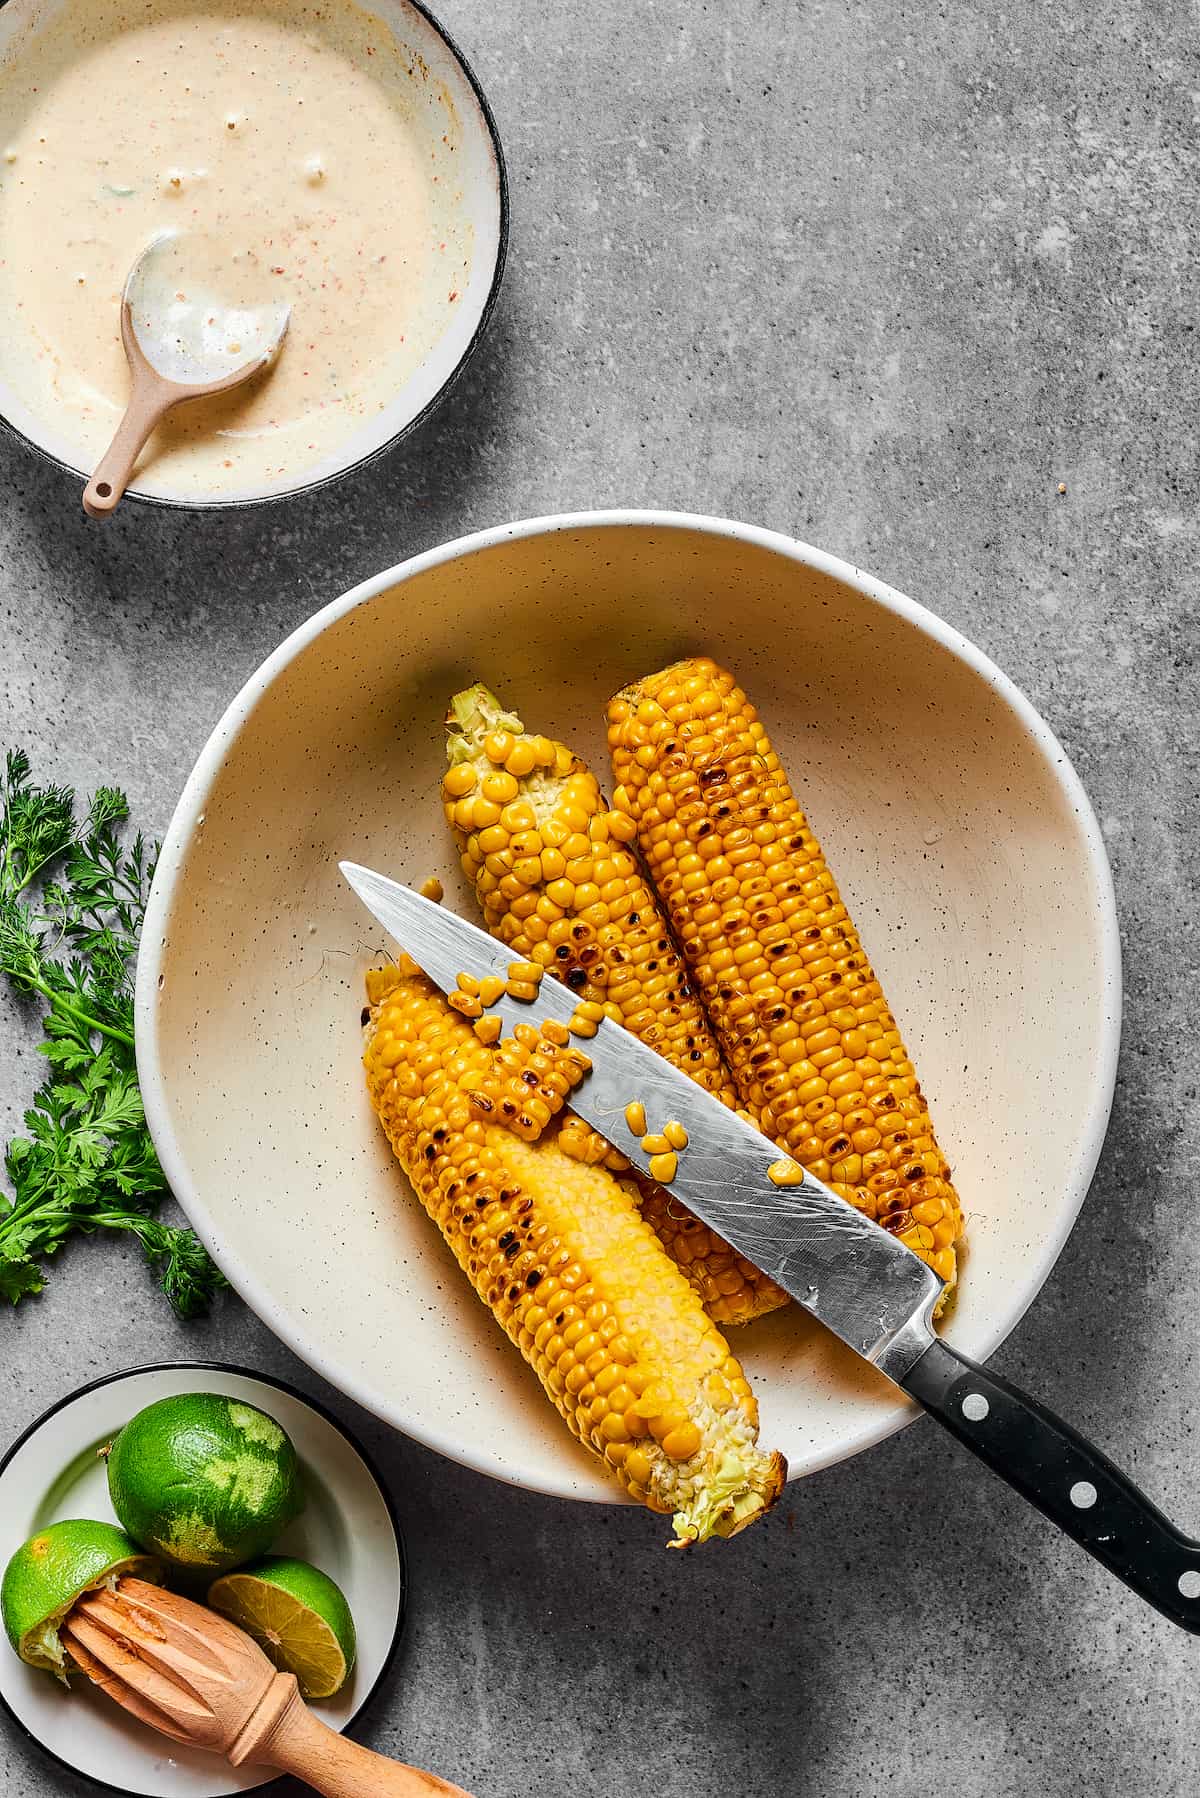 Grilled corn on the cob. Some of the kernels have been cut away from the corn cobs, and a knife is resting in the bowl.